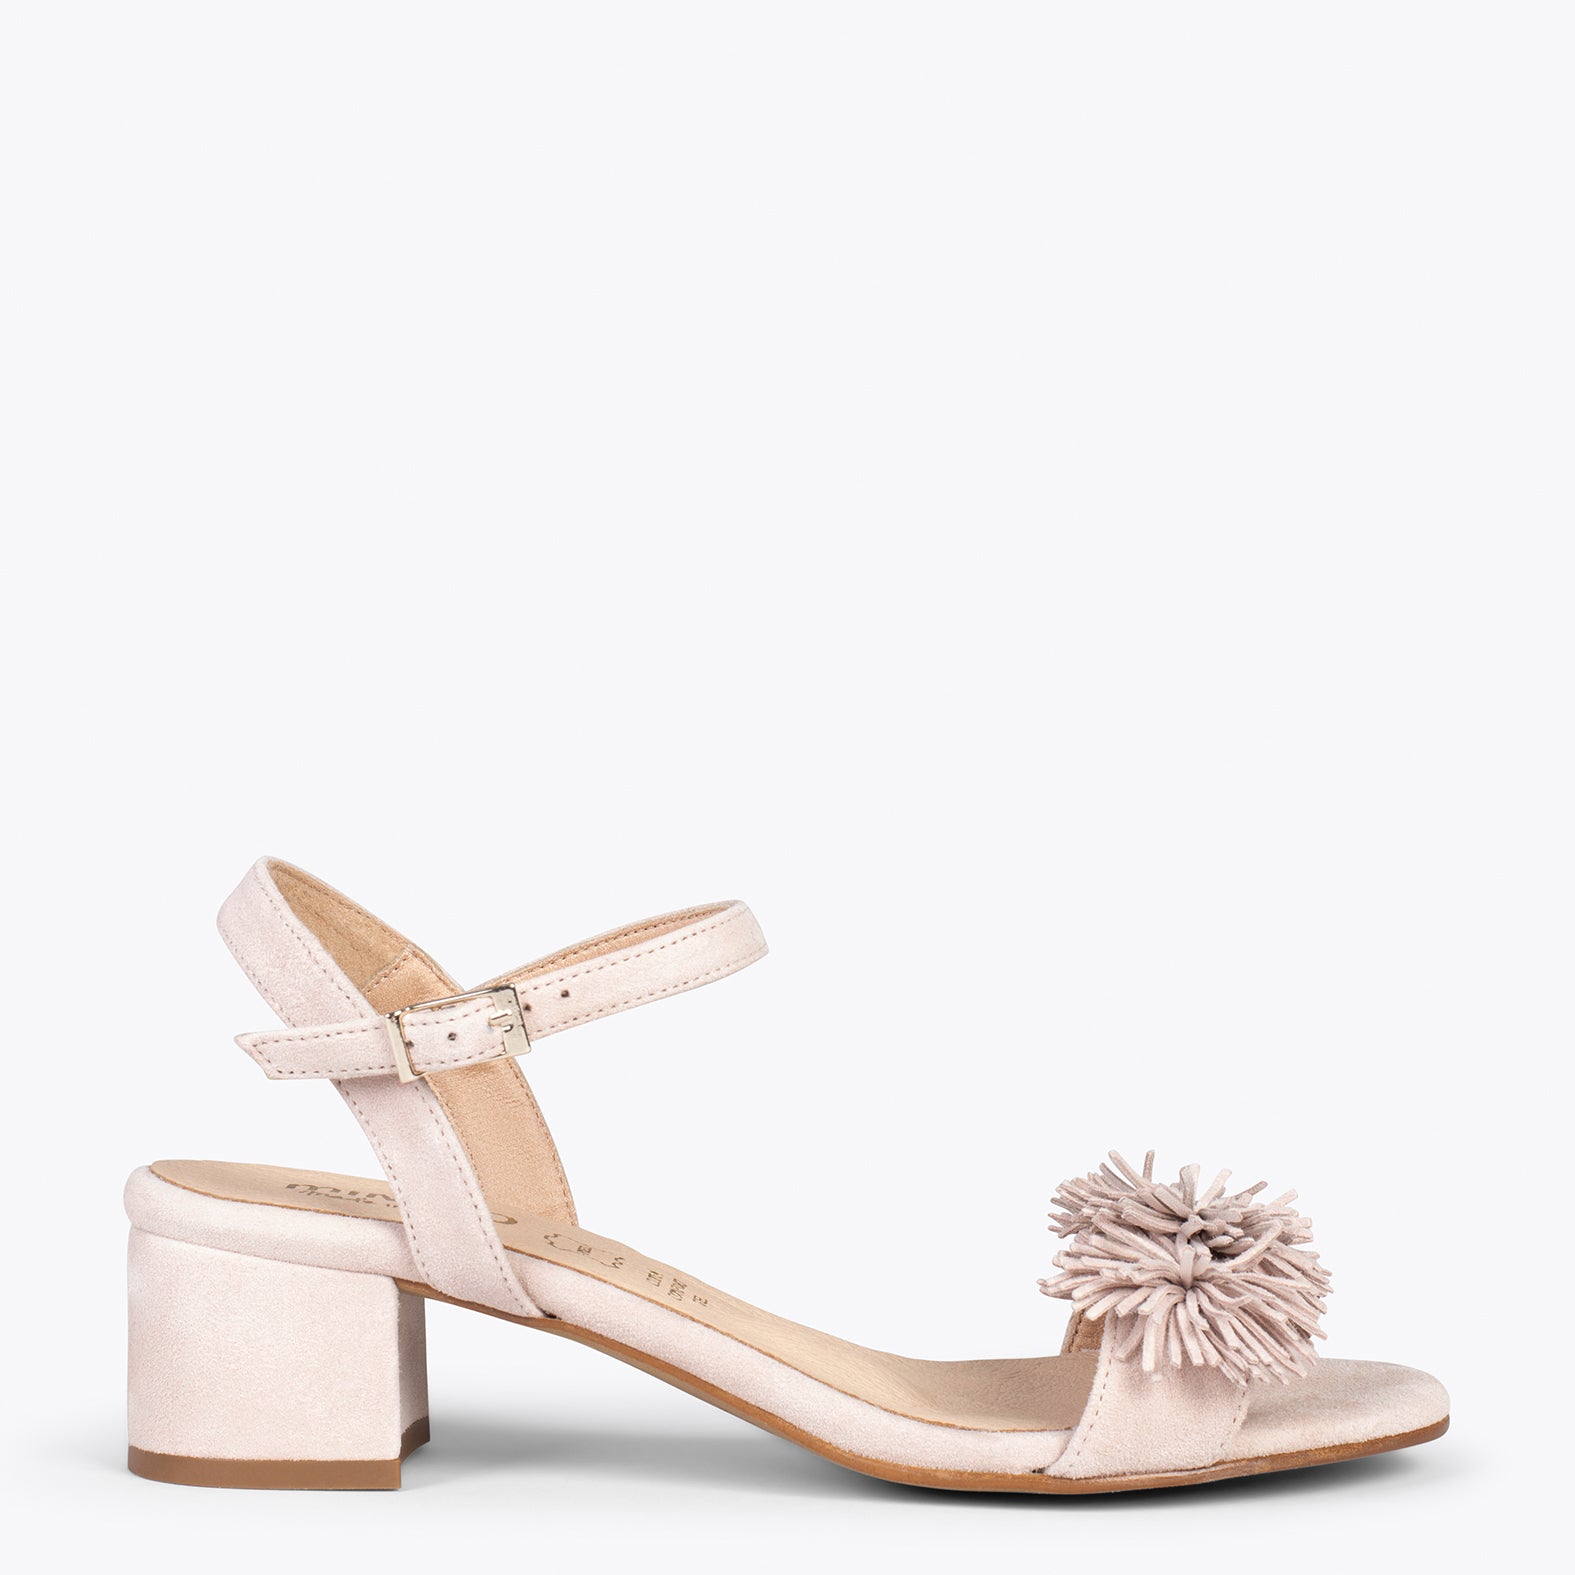 ZINNIA – NUDE sandals with pompom details